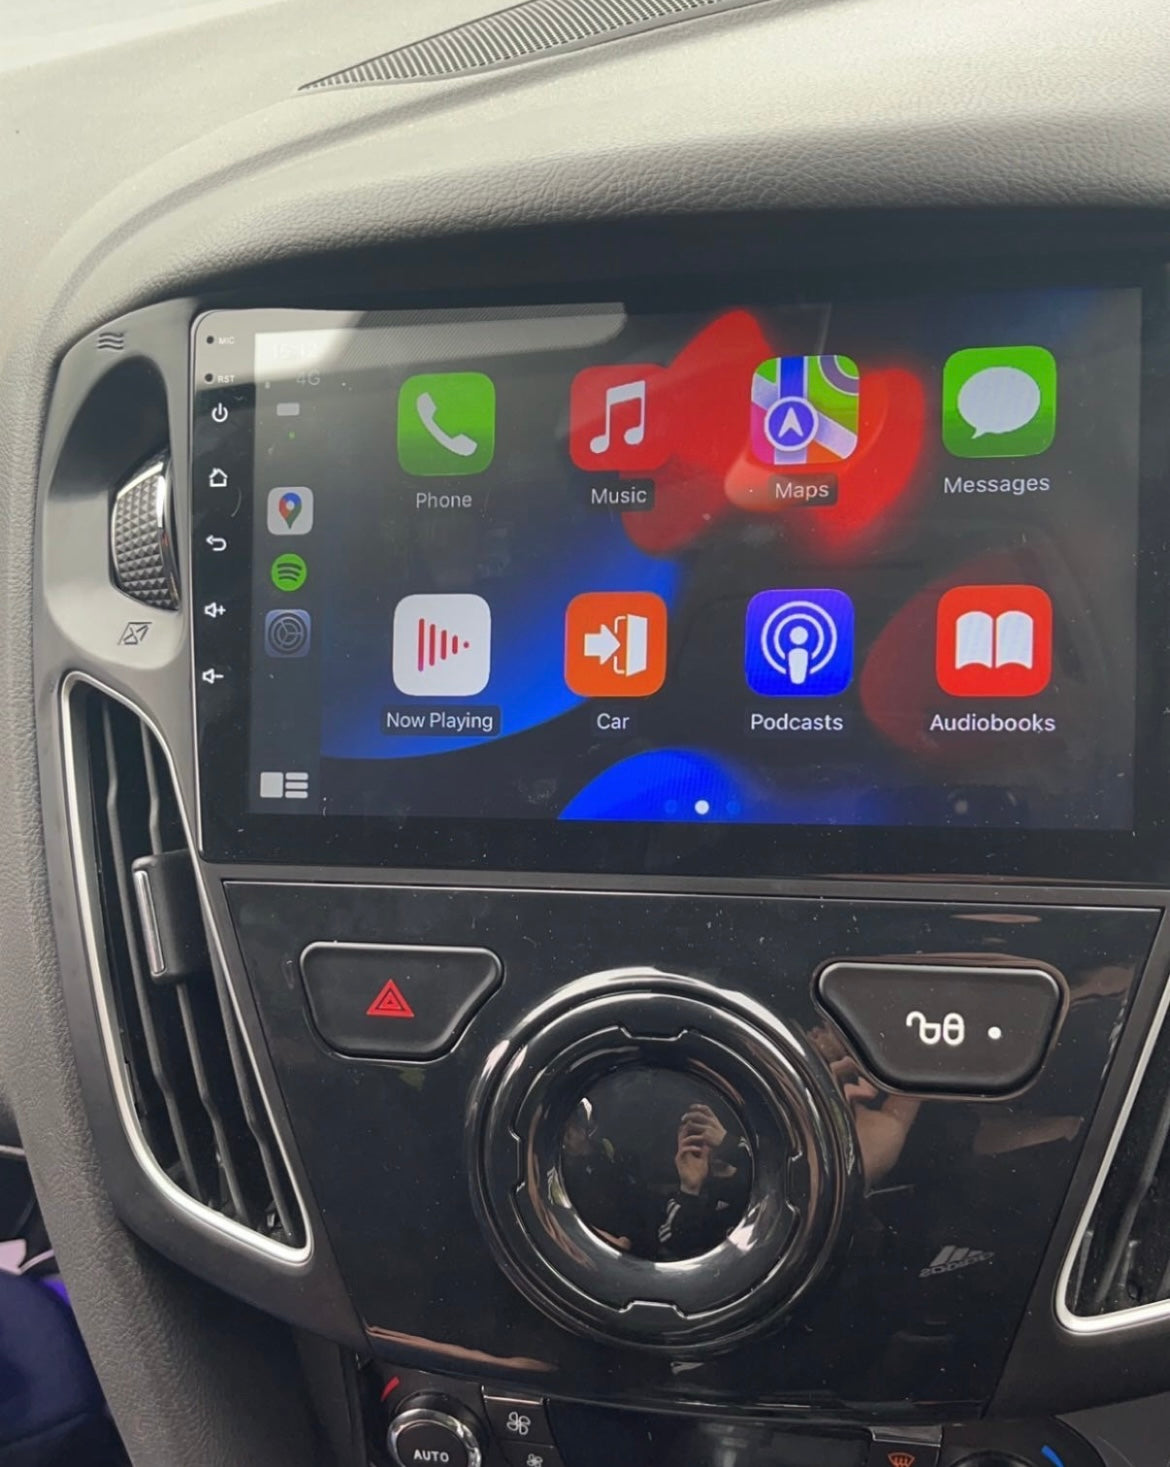 Ford Focus Mk3 - Android Screen with Apple CarPlay